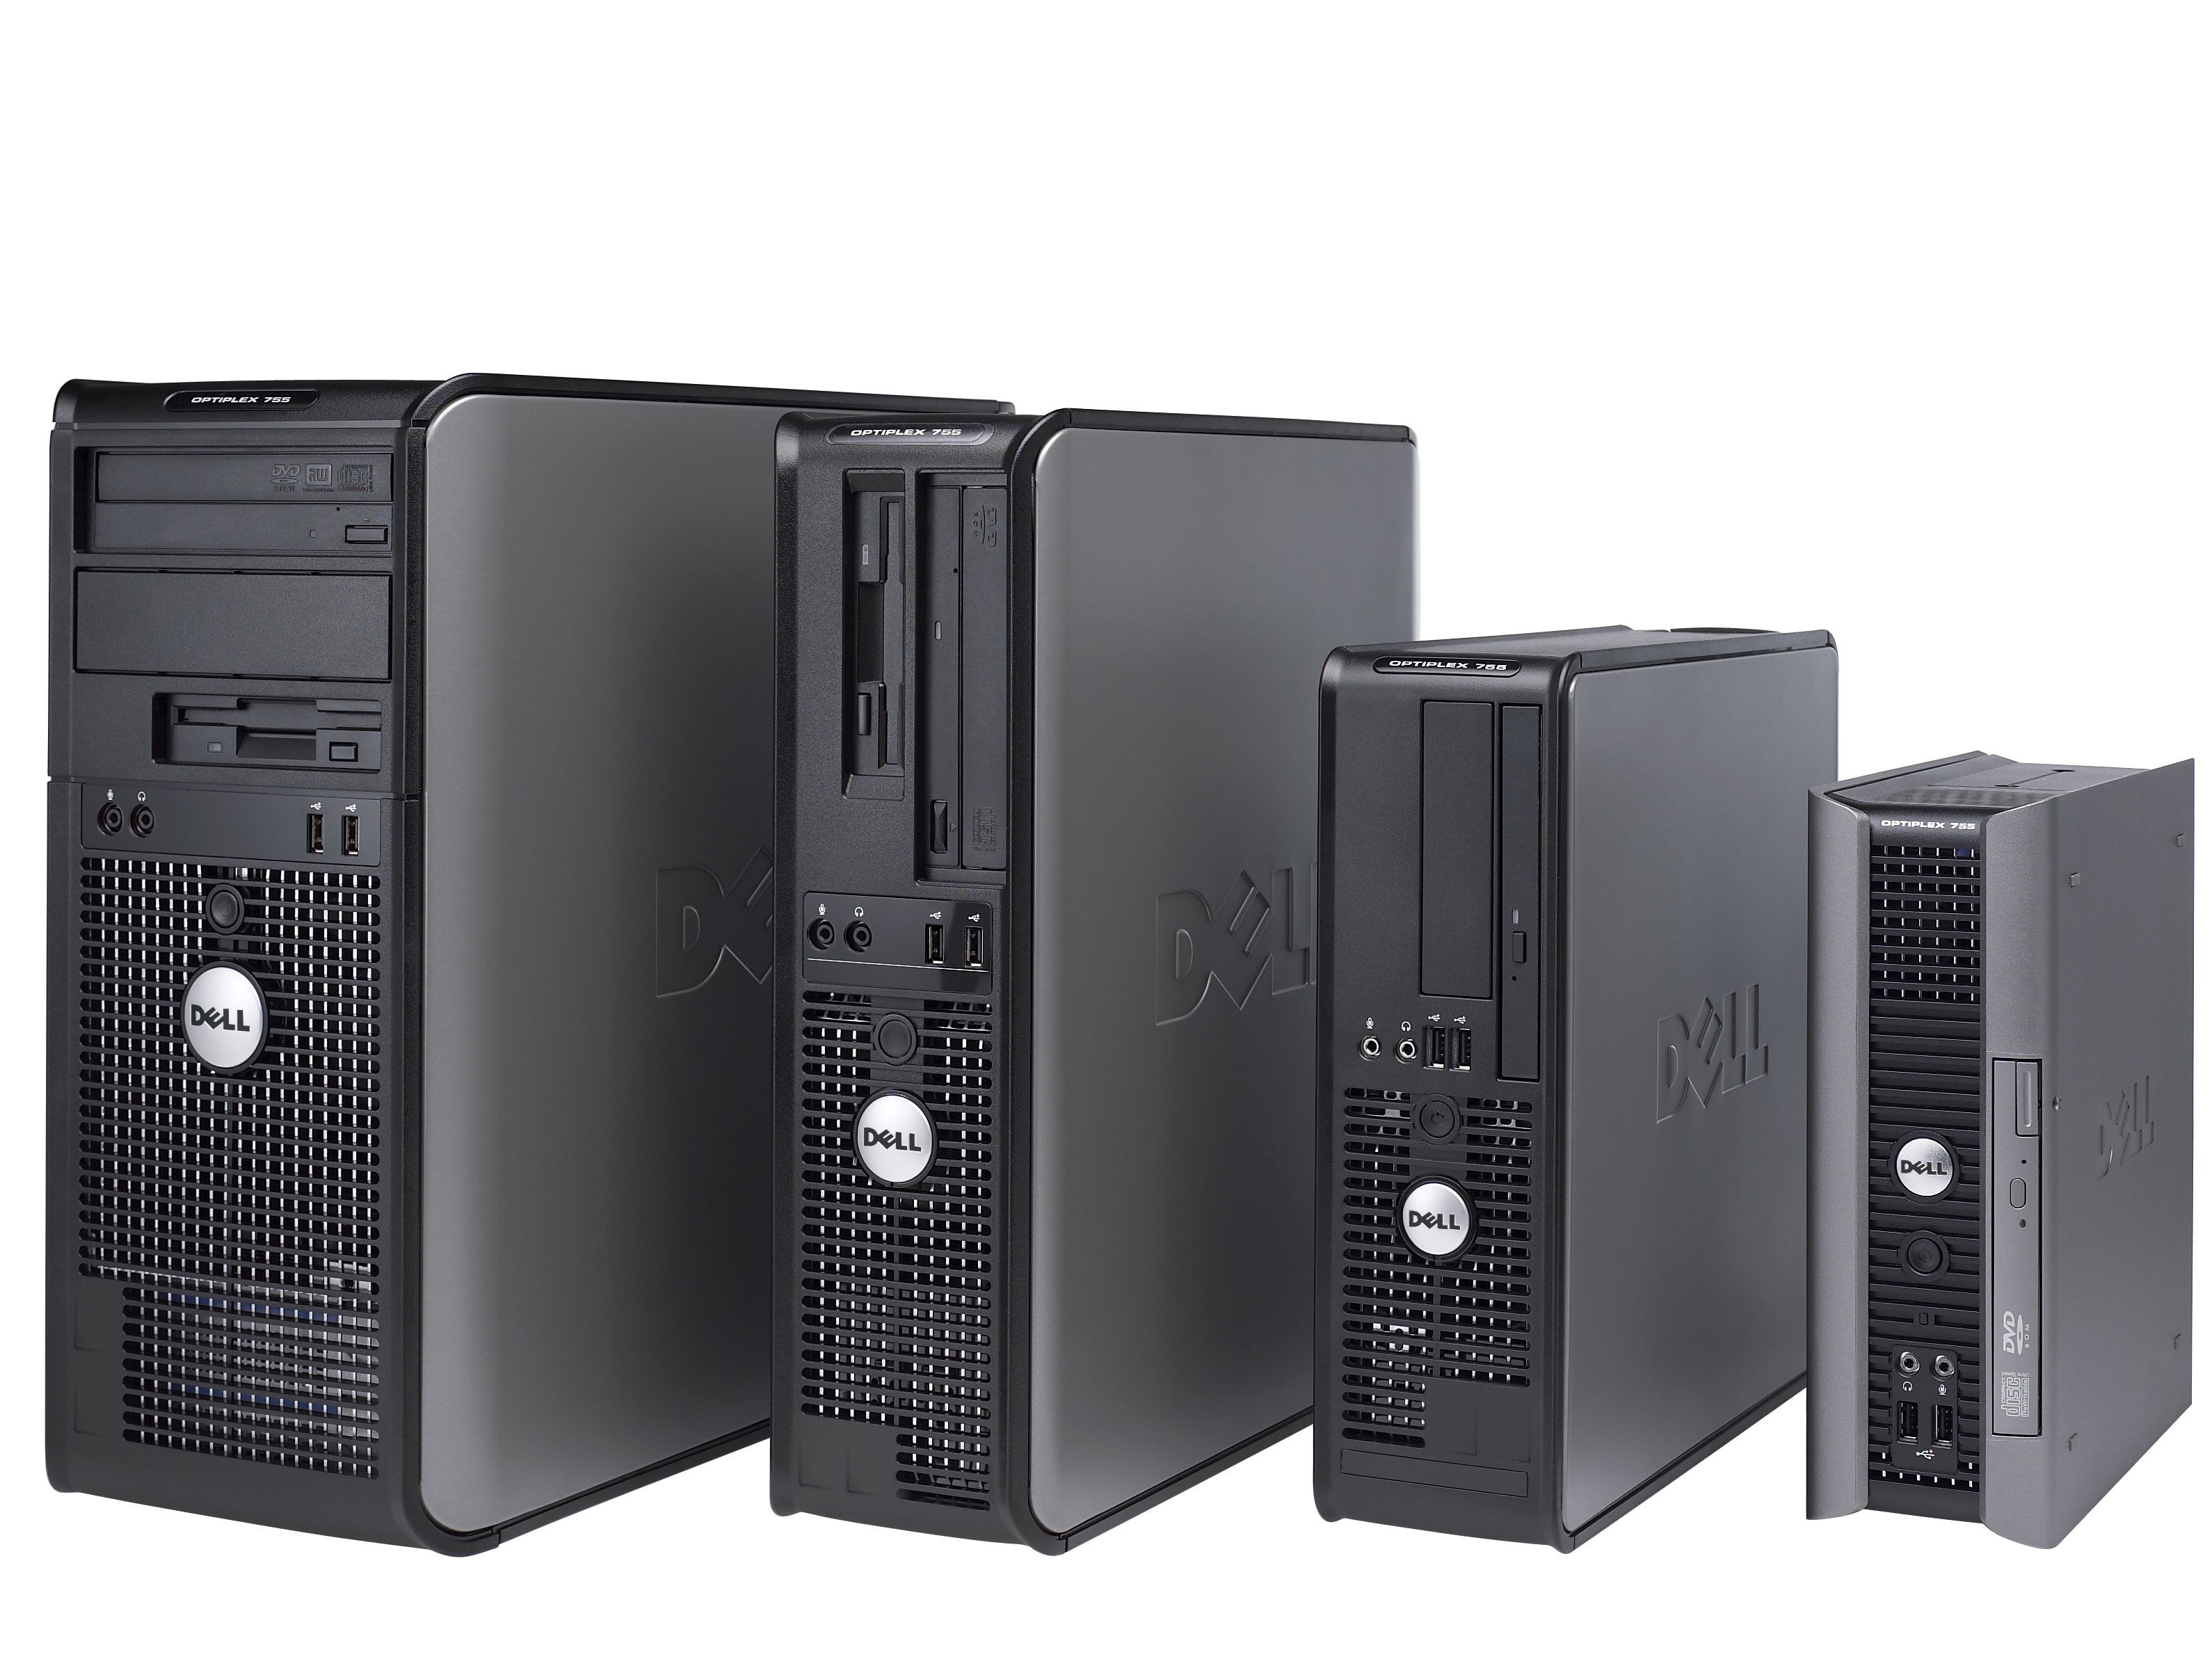 Dell Optiplex 320 Drivers For Windows Xp Free Download